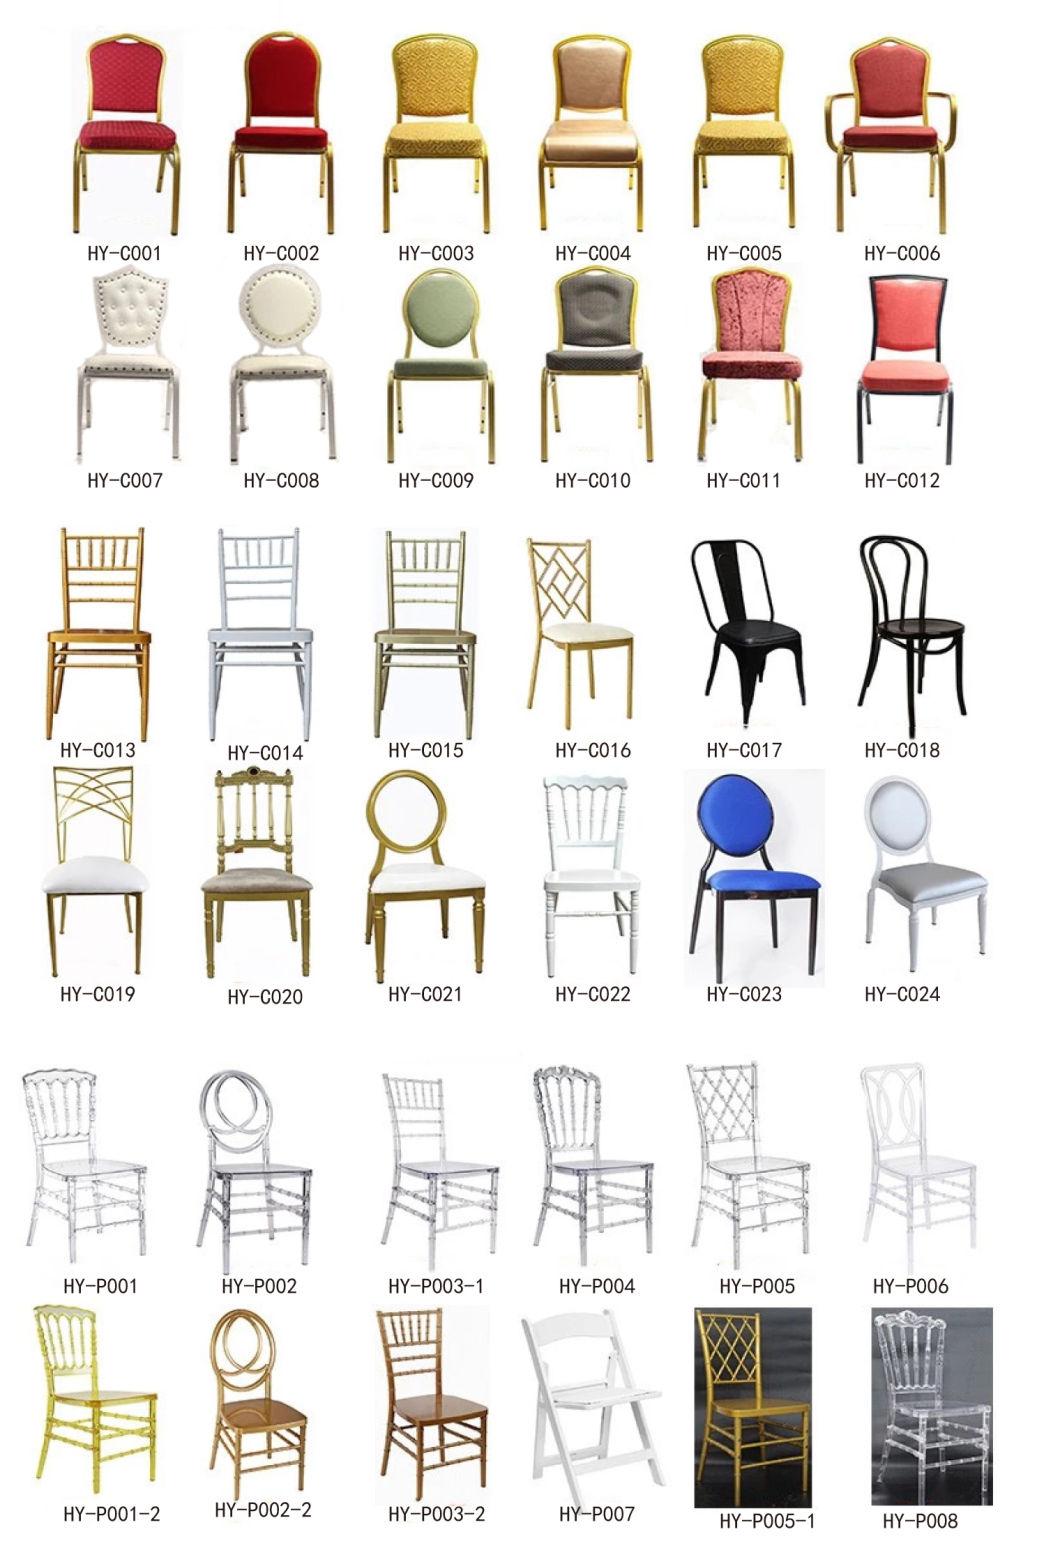 Factory Directly Wholesale New Design Comfortable Wood Like Metal Aluminum Stacking Hotel Banquet Chair for Dining Event Wedding Conference Meeting Room Hall